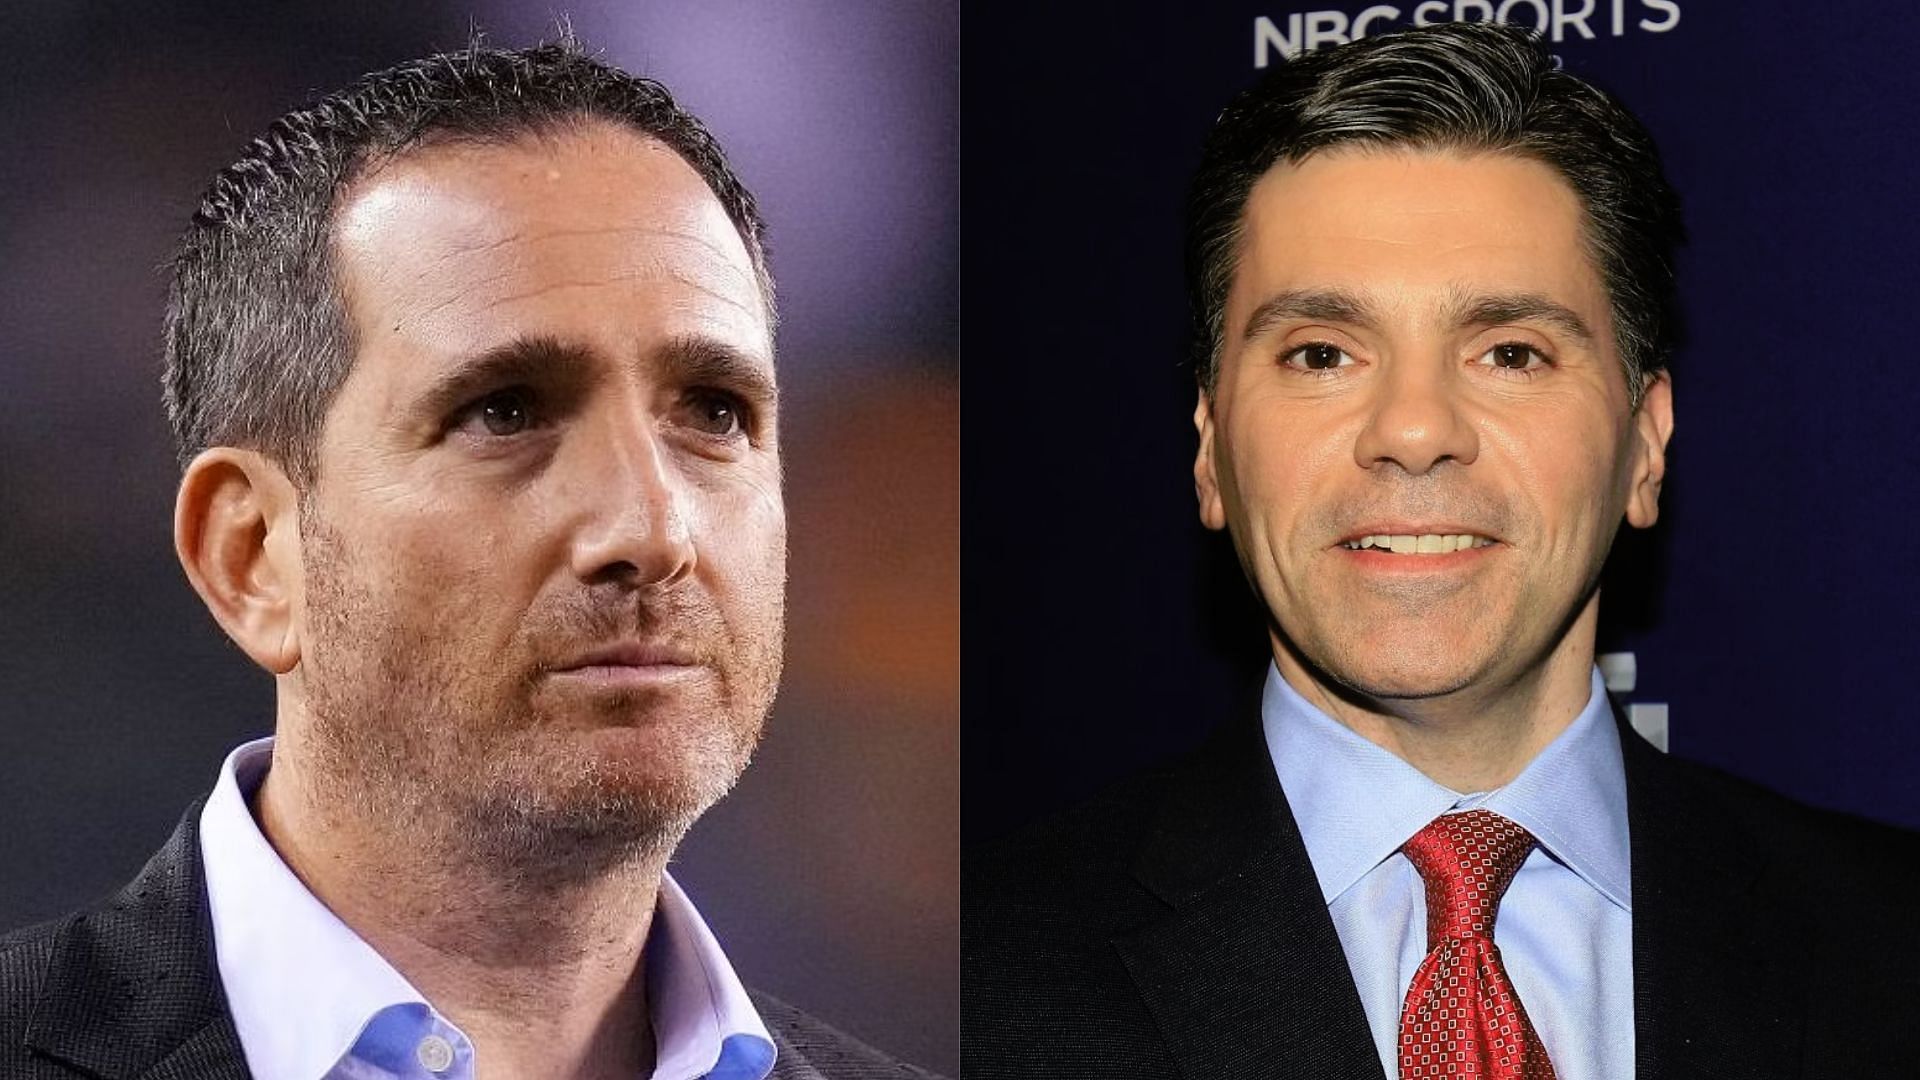 In a recent interview, Philadelphia Eagles general manager Howie Roseman had a tense exchange with Pro Football Talk host Mike Florio.